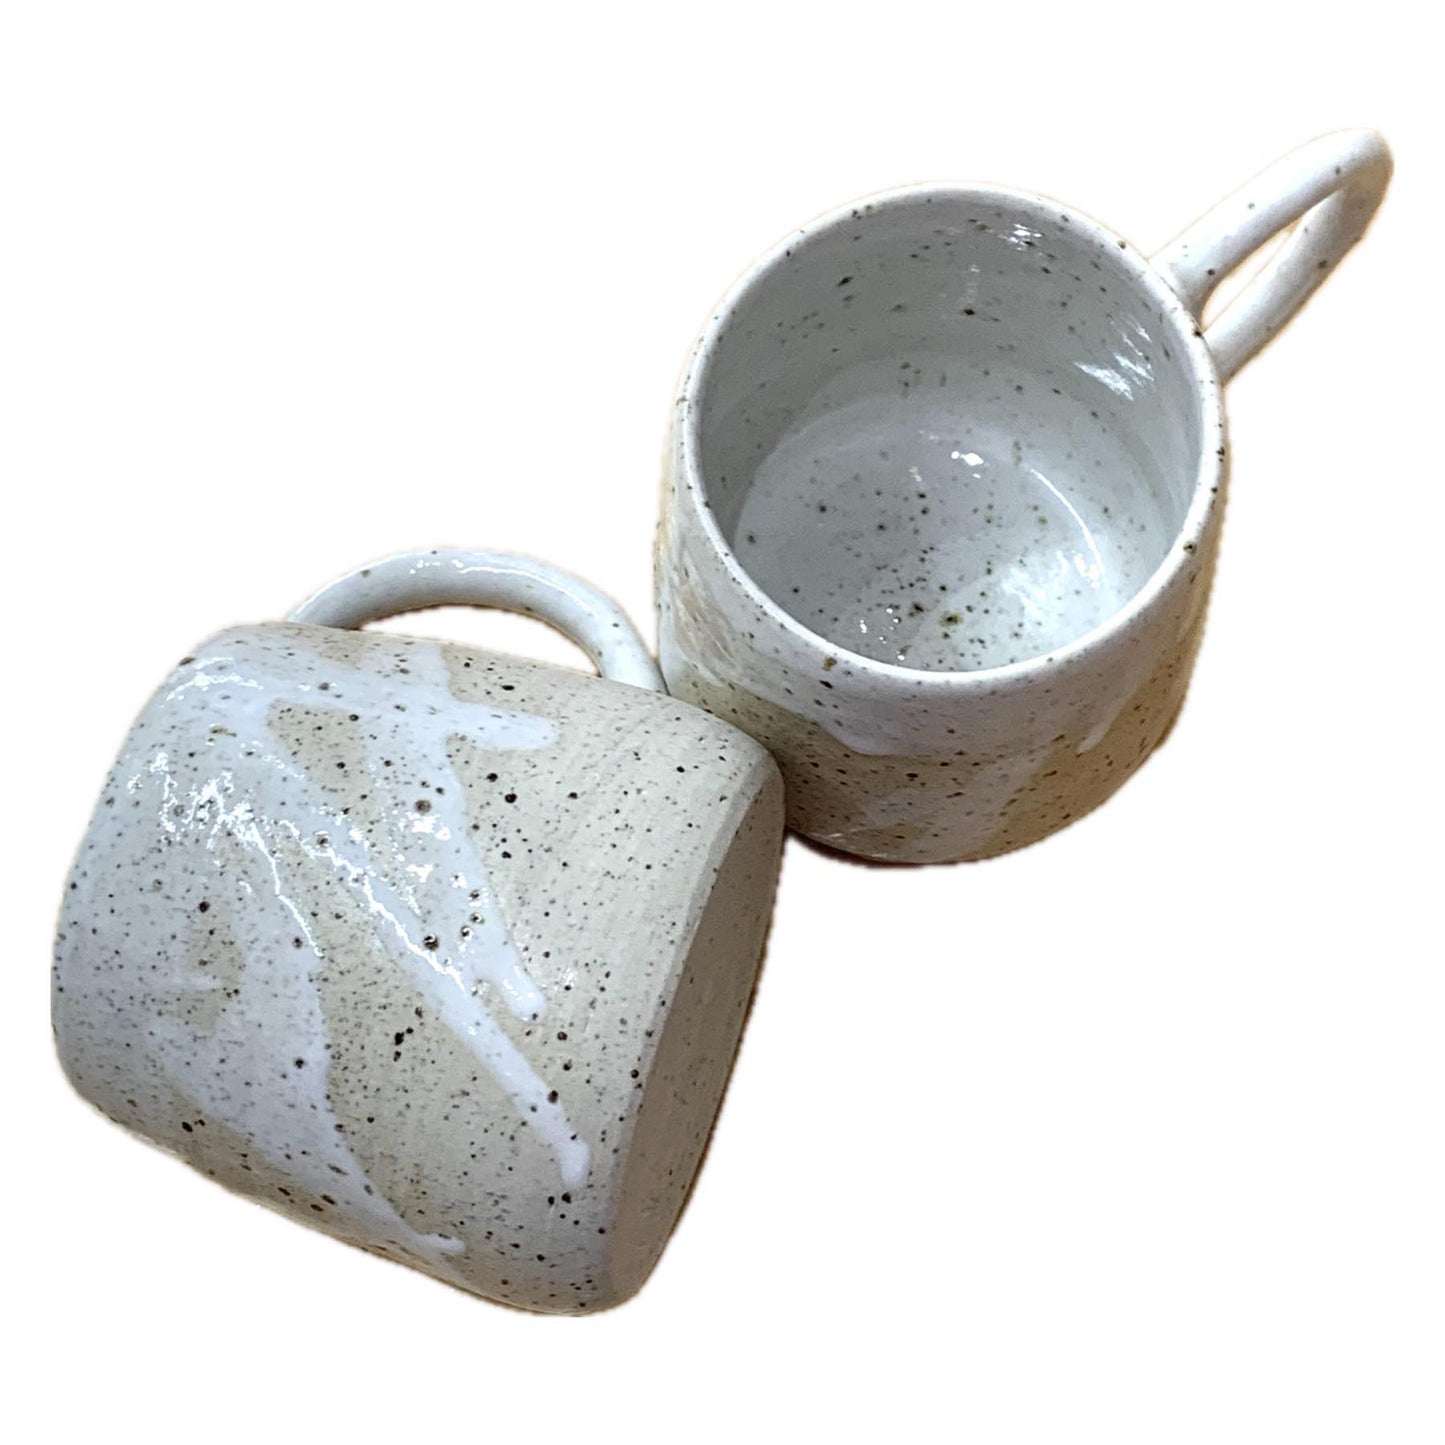 EARTH BY HAND- White Dribble Glazed Speckled Mugs